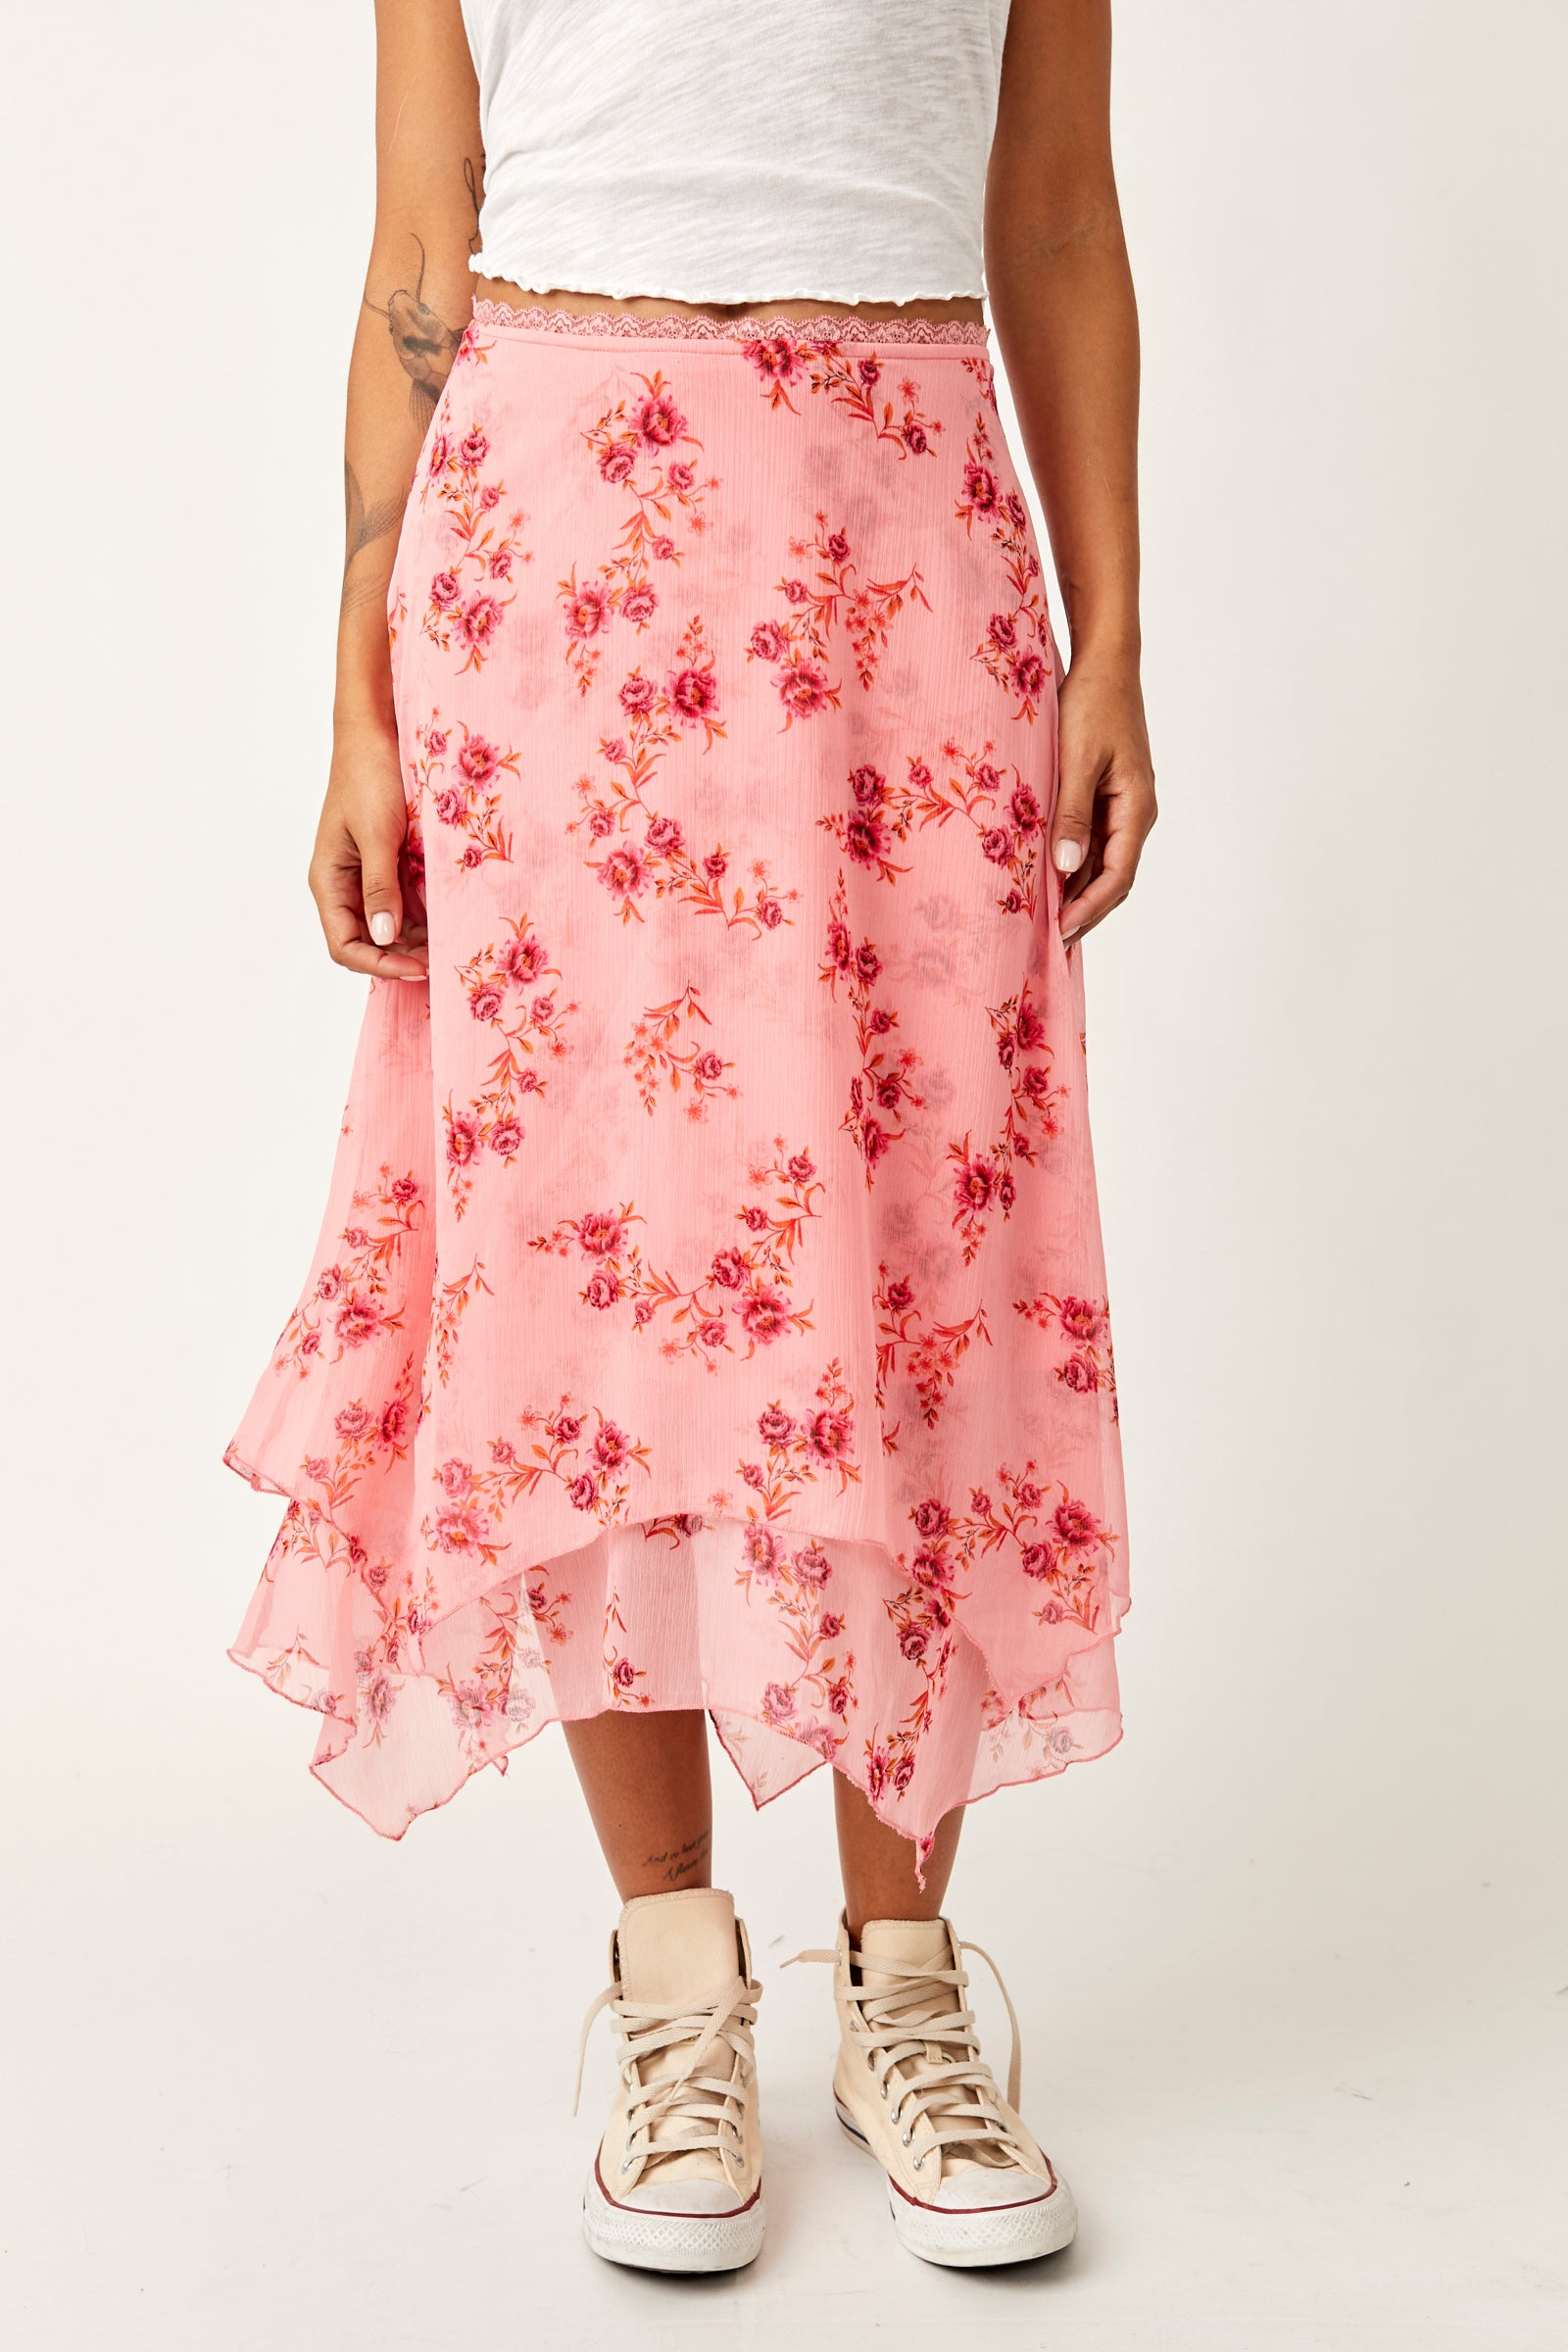 Garden Party Skirt In Pink Free People